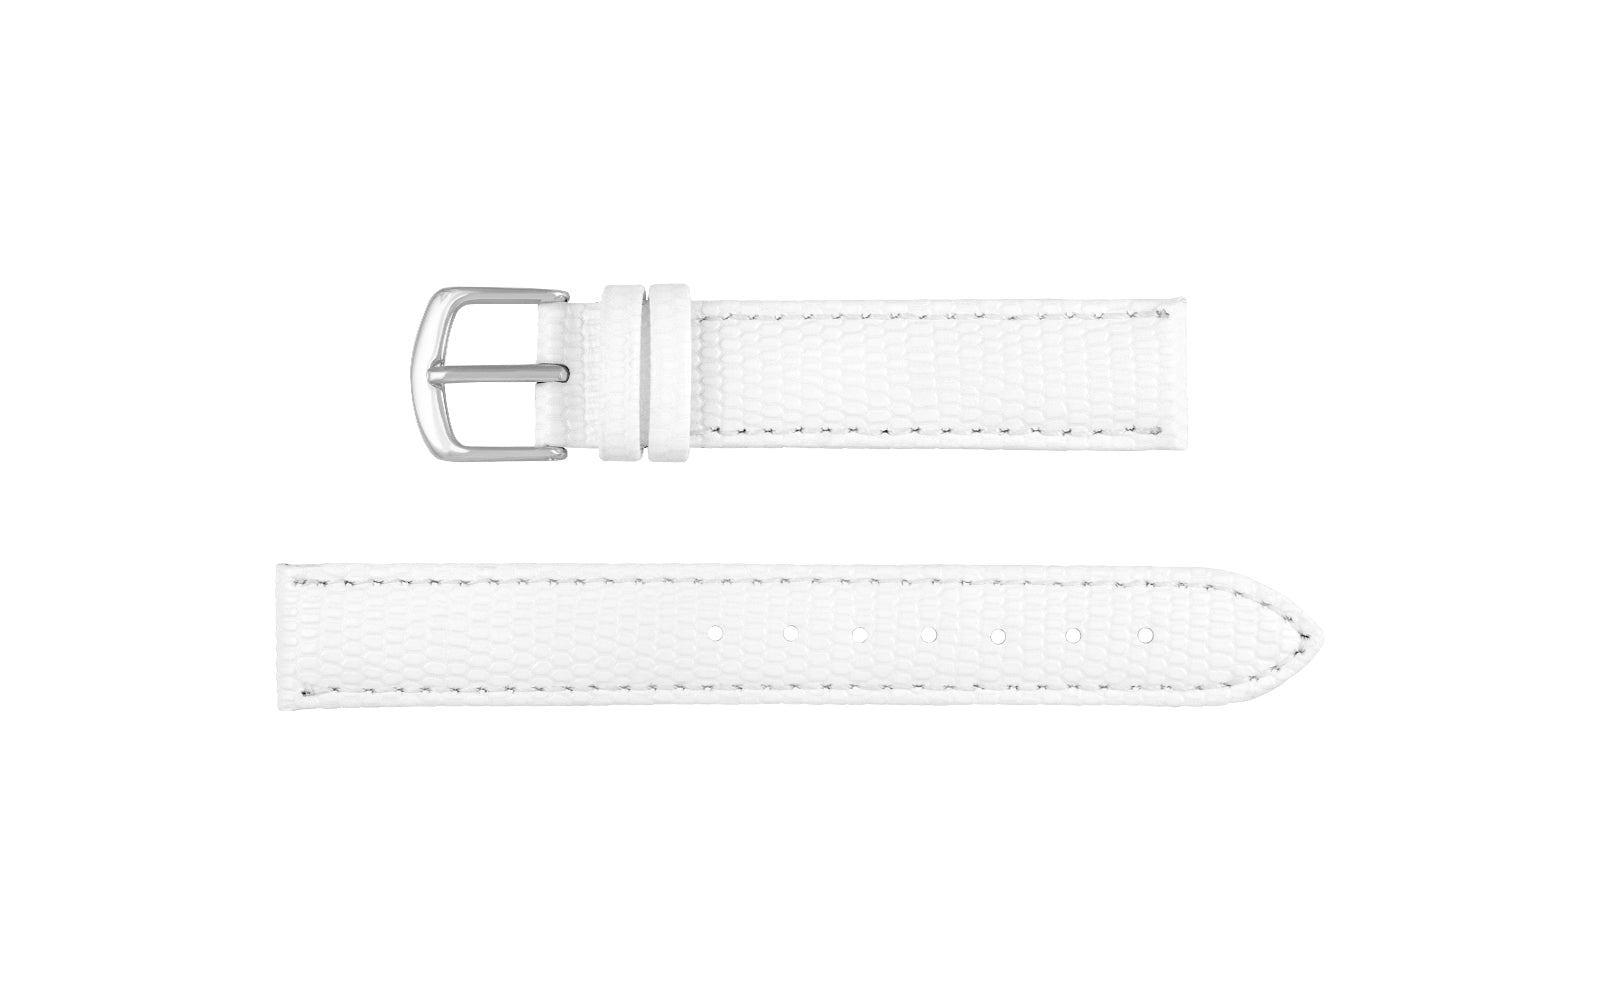 Roma Leather Watch Strap, Made in Italy